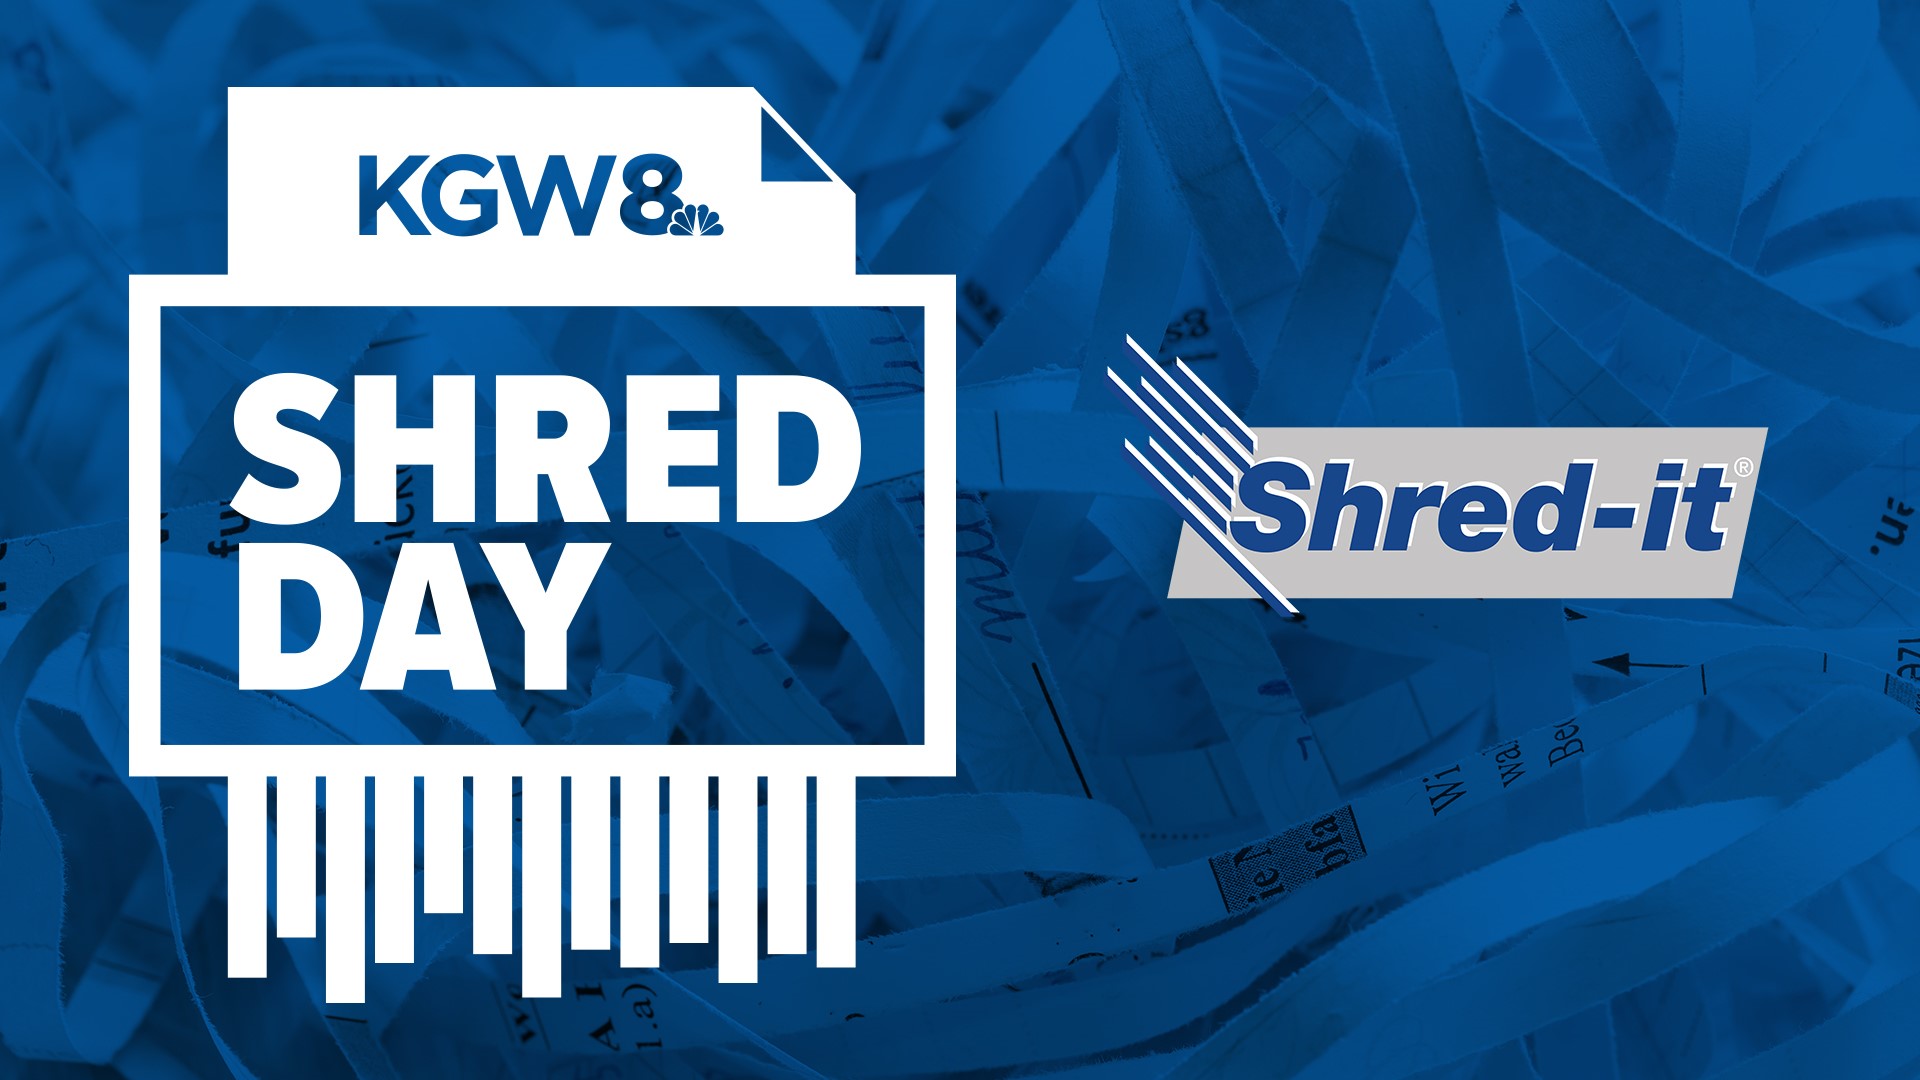 KGW Shred Day is back on Saturday, June 22